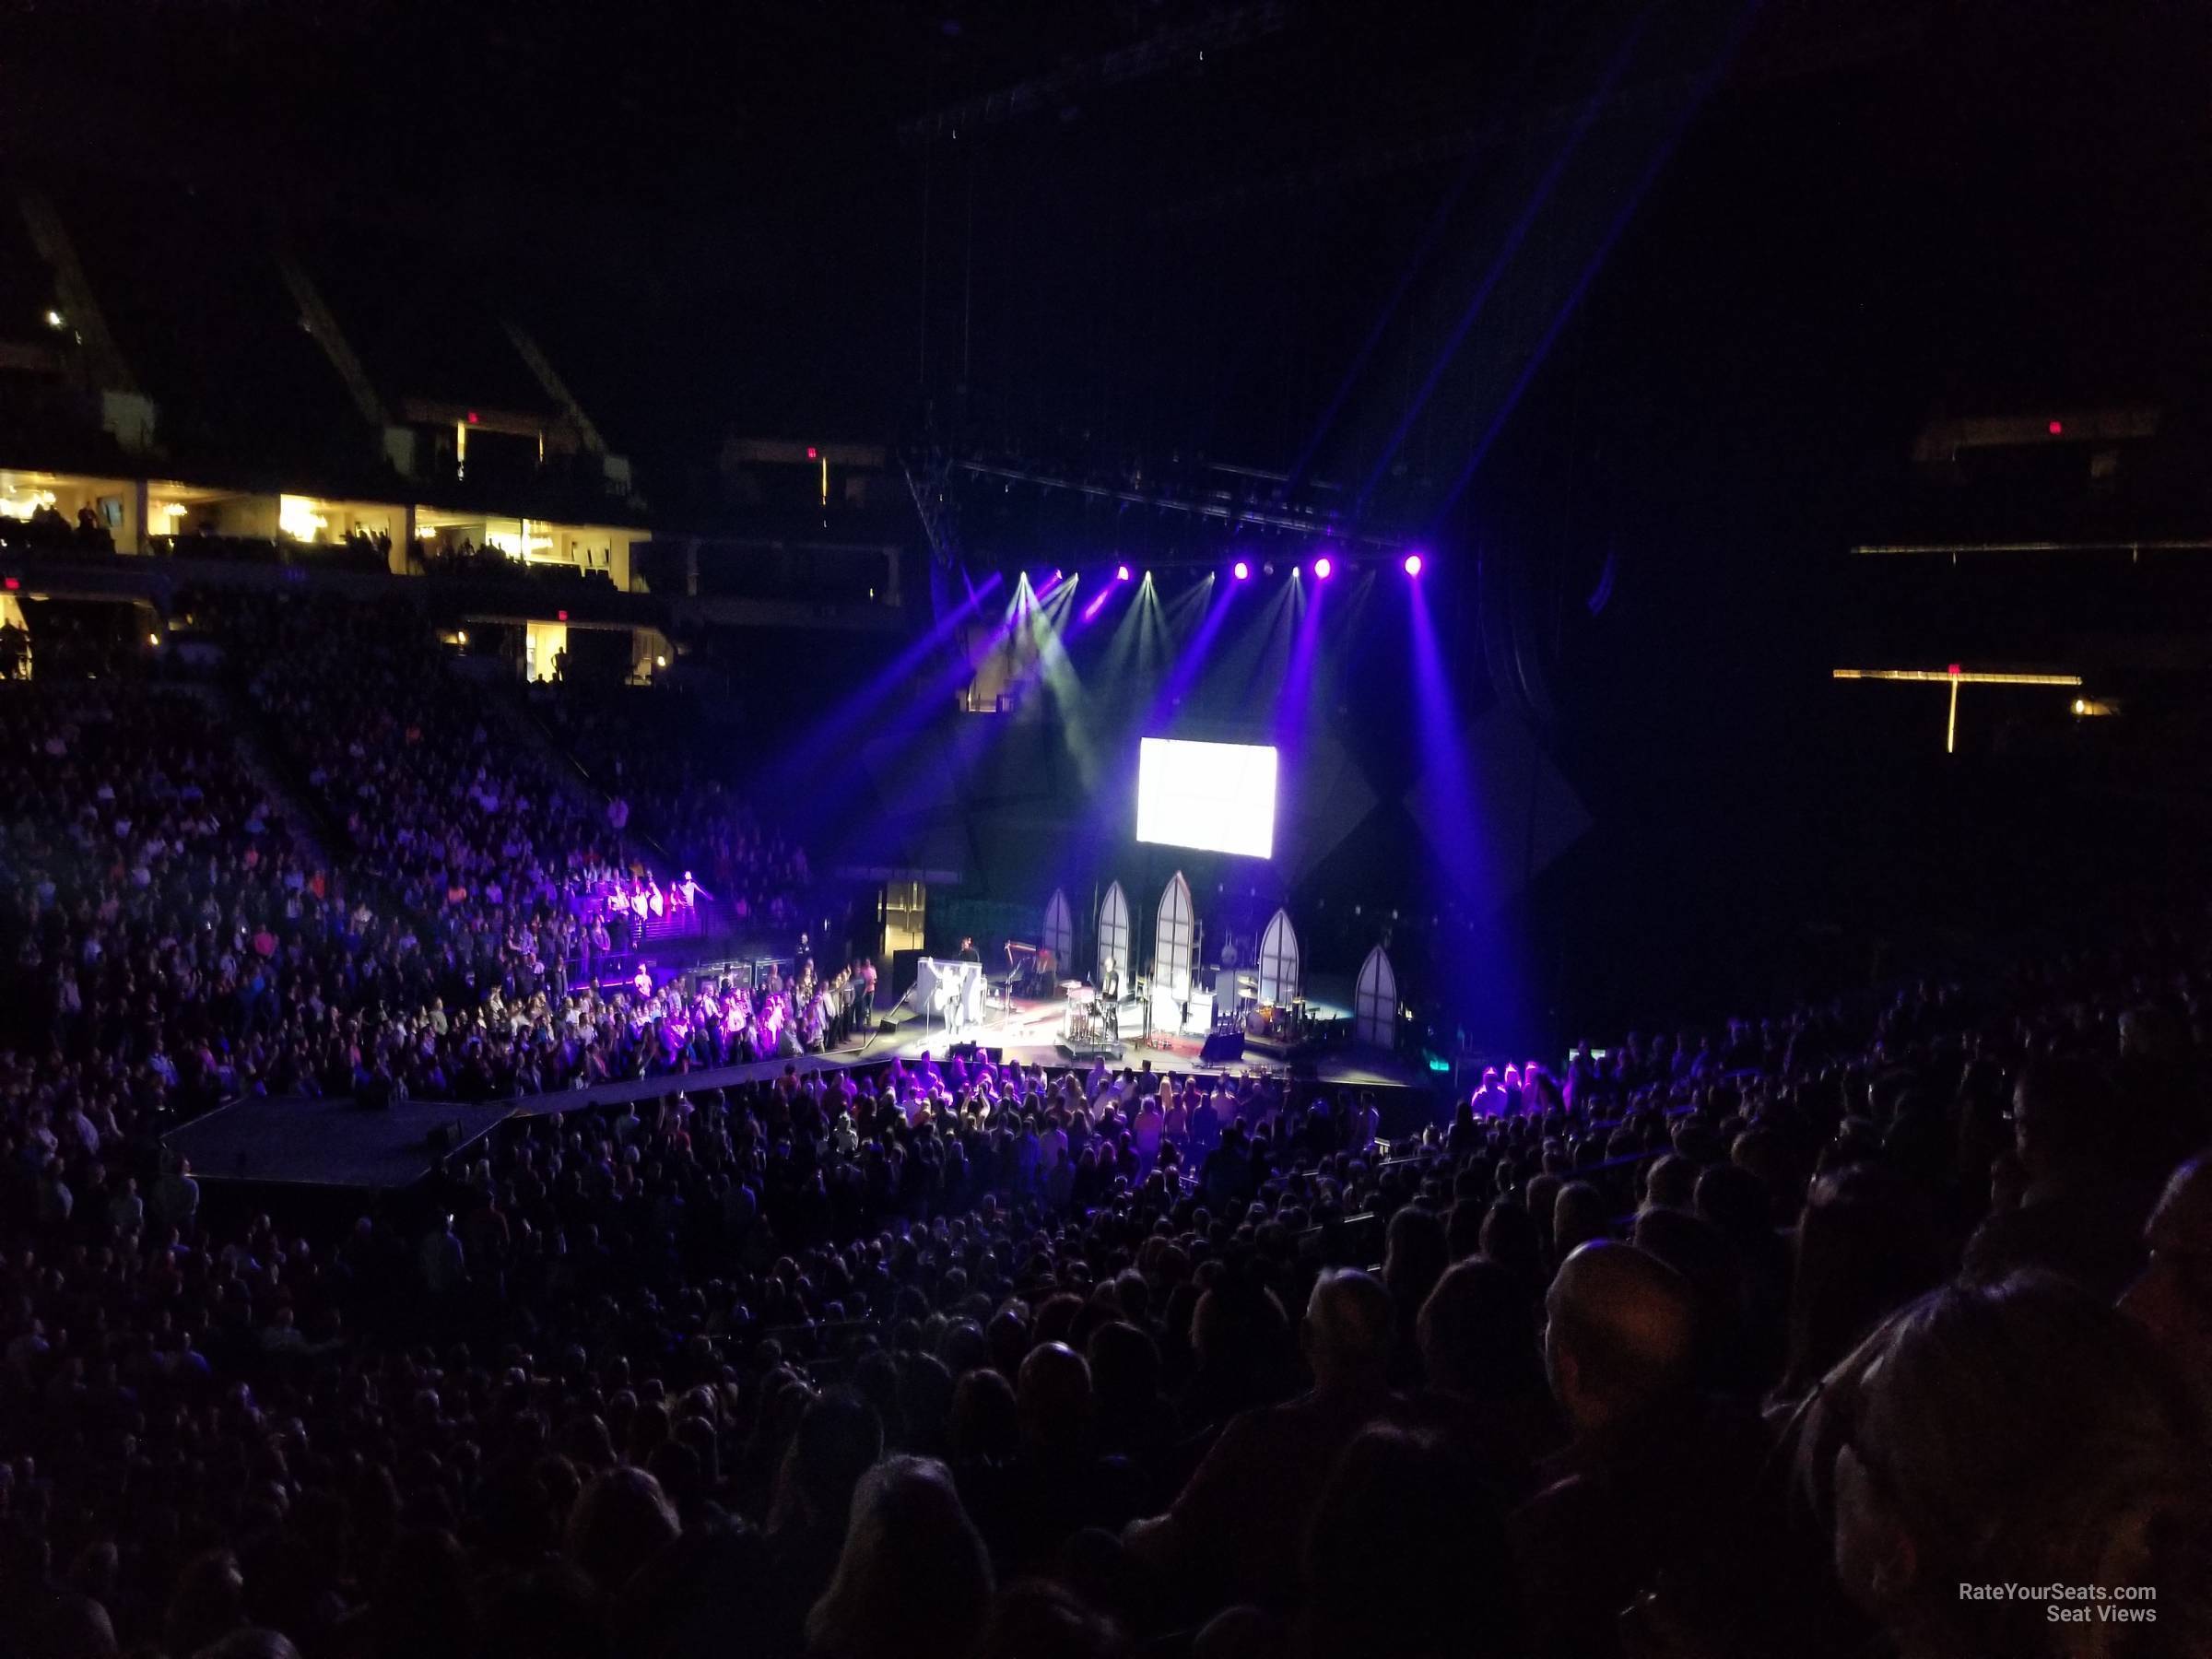 Section 131 at Target Center for Concerts - RateYourSeats.com